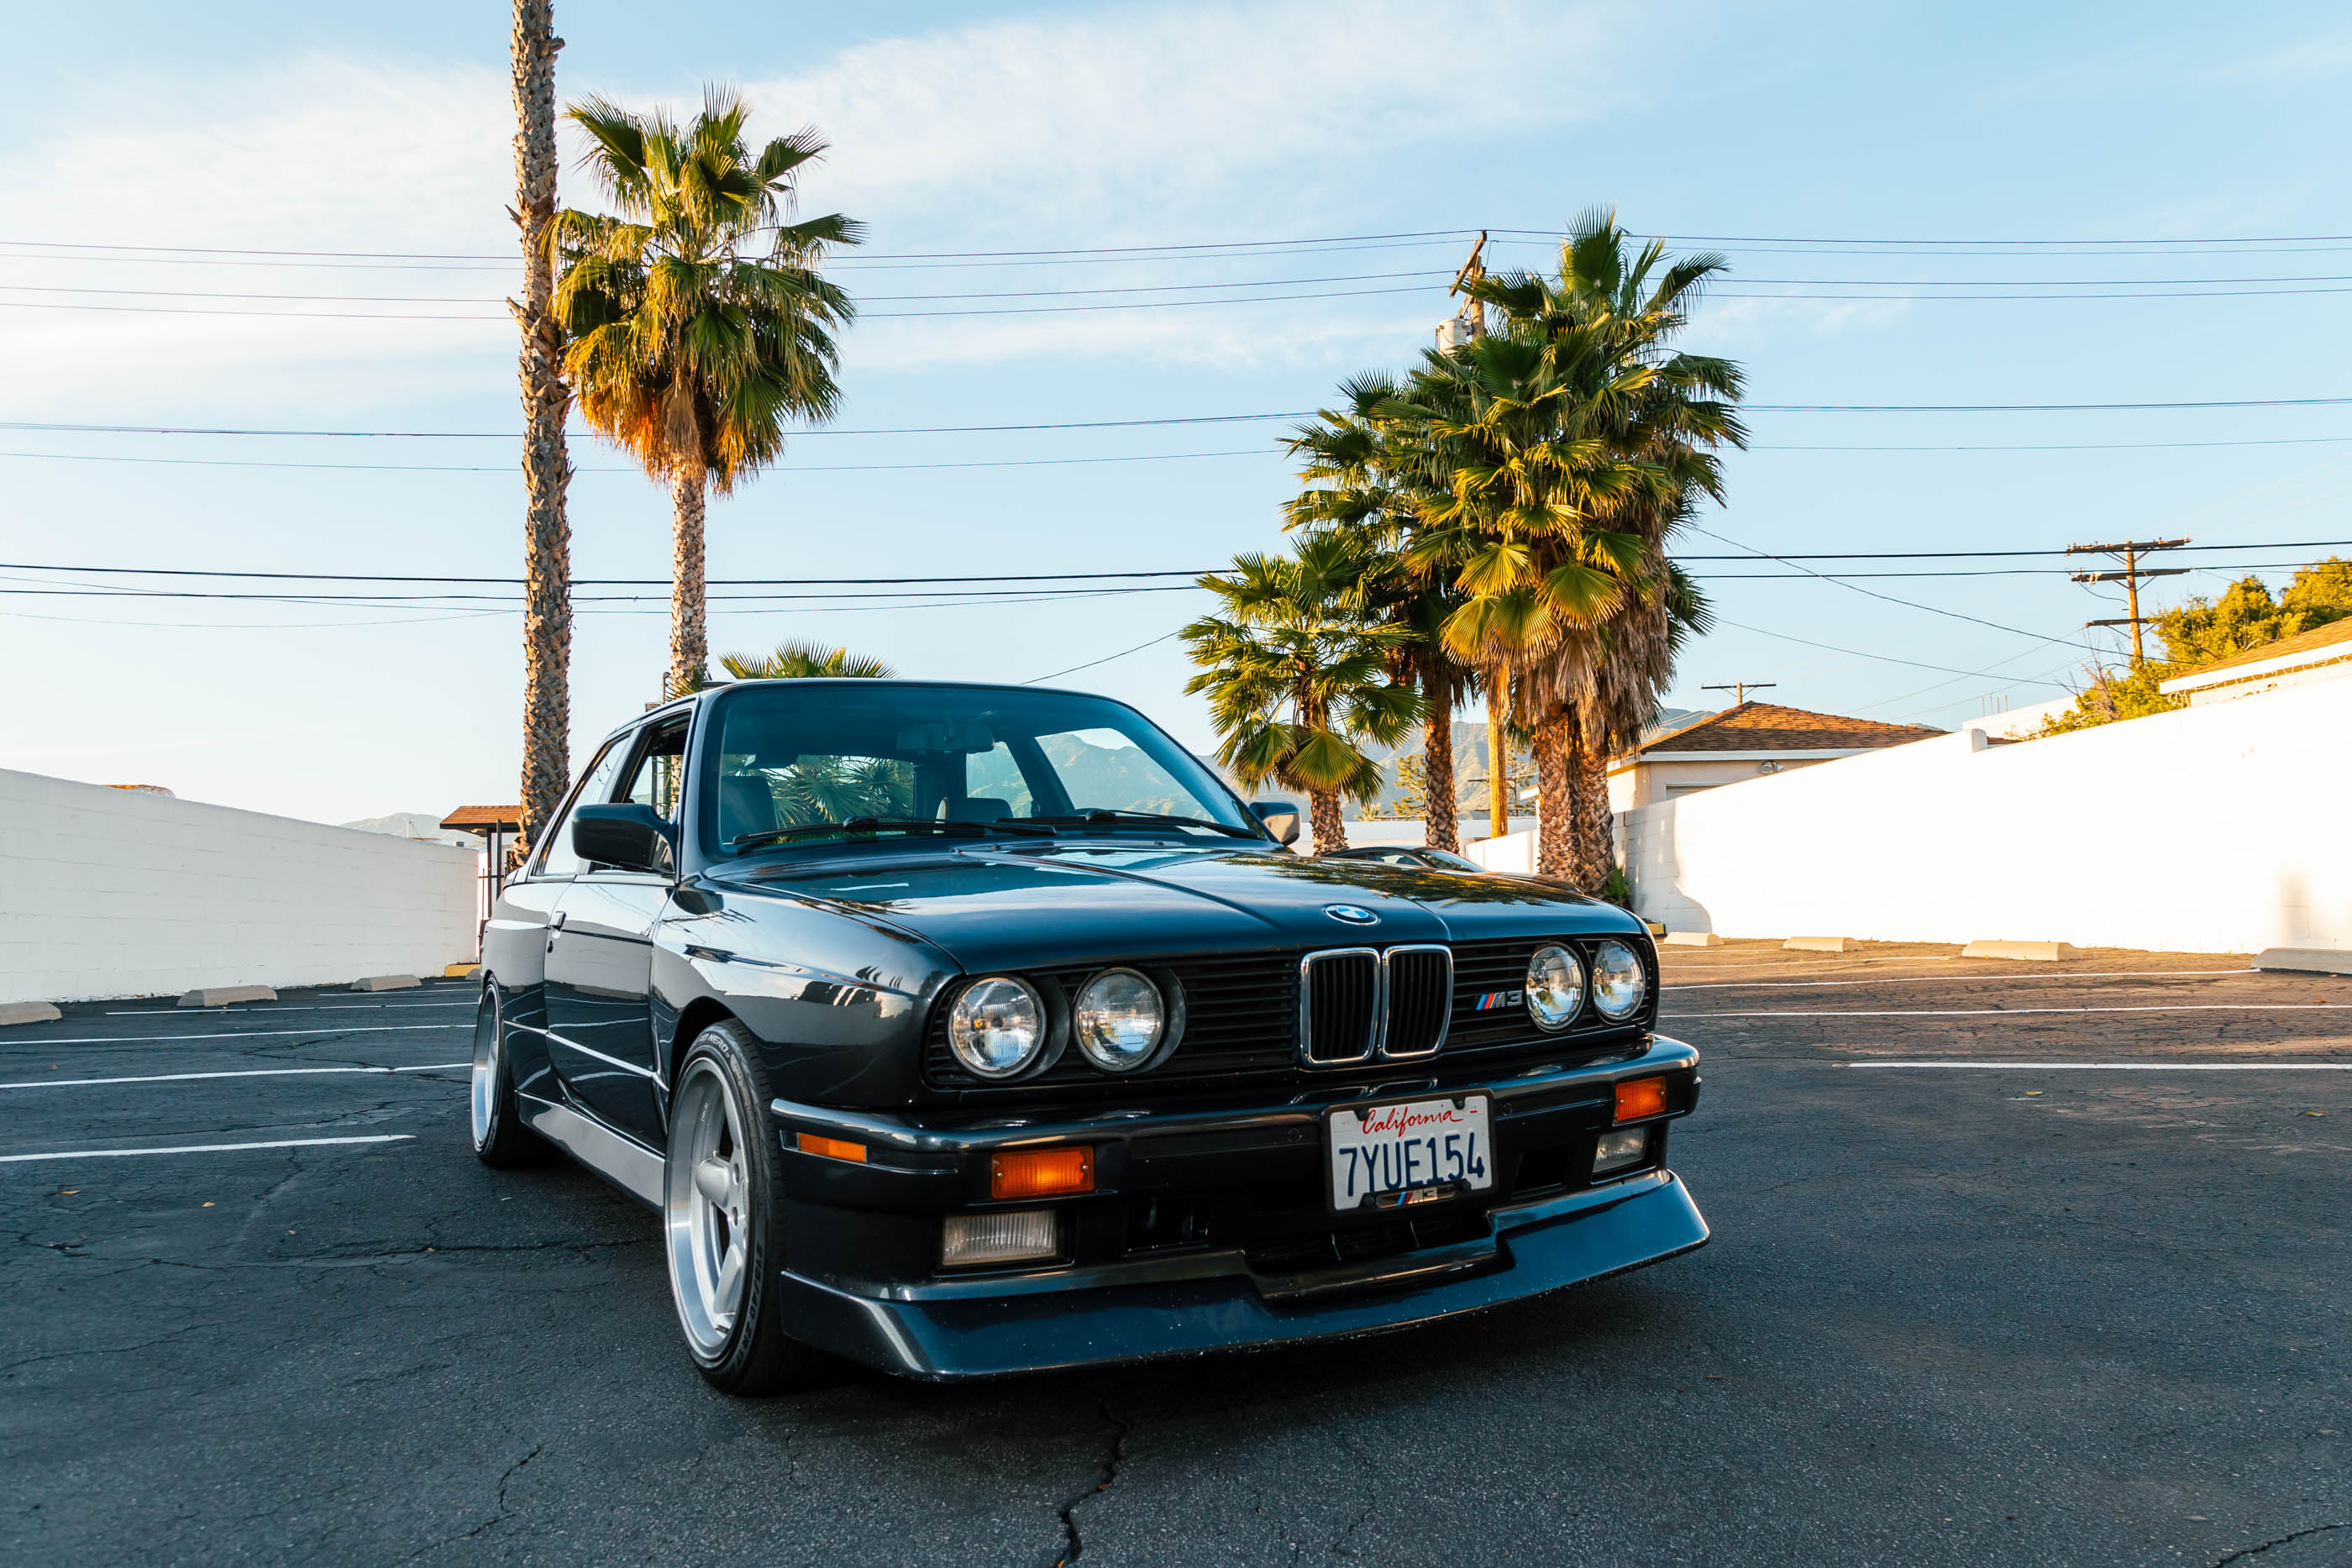 Petrolhead Corner - Paying Tribute to the iconic BMW E30 M3